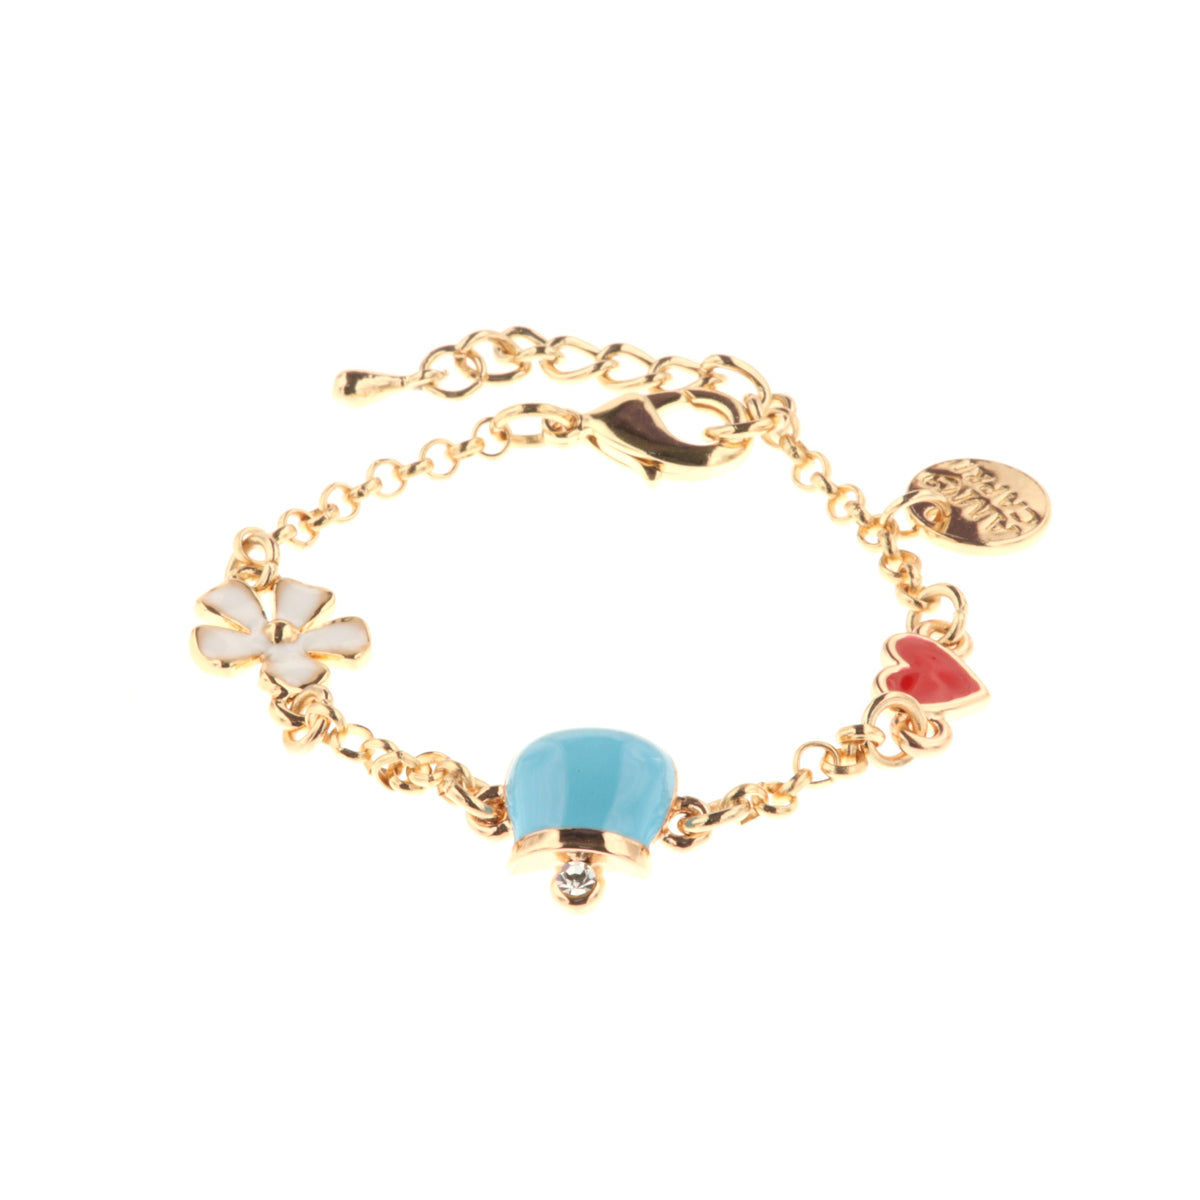 Metal bracelet with pendants embellished with colored enamels in the shape of a charming bell, heart and flower